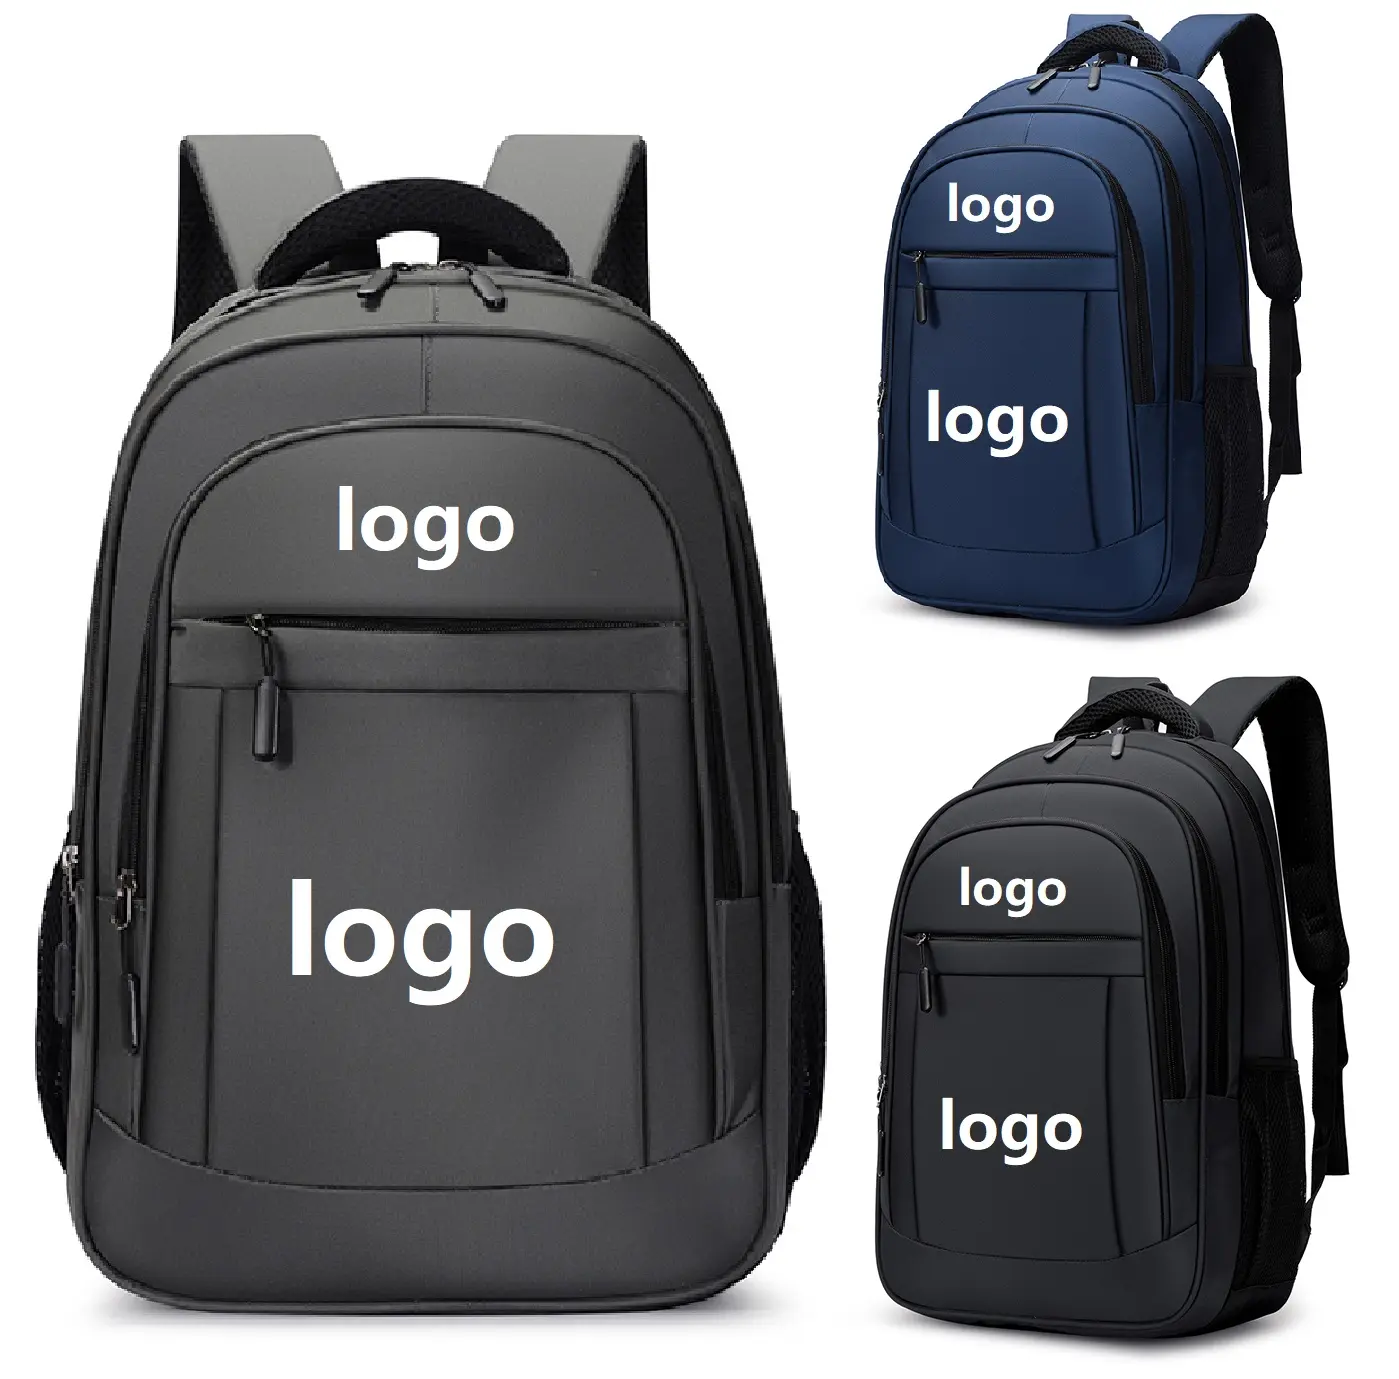 custom logo shifang wholesale with compartment rucksack customized large capacity waterproof computer laptop bag backpack